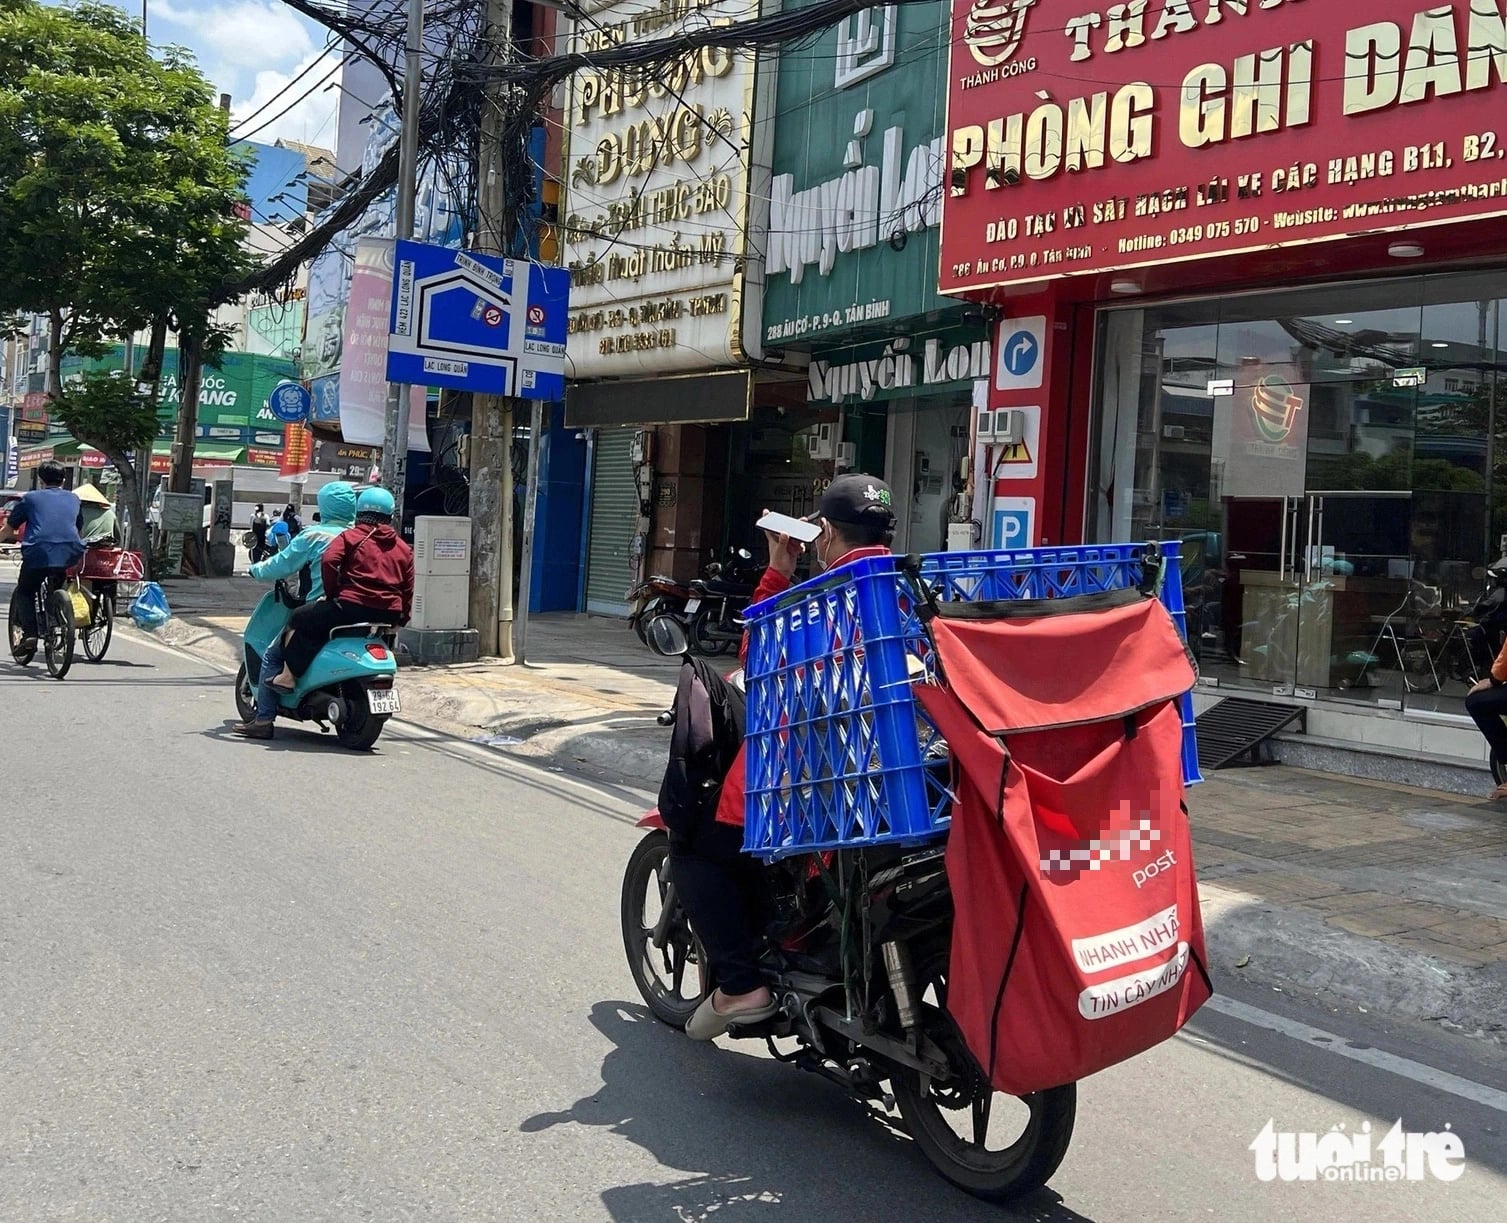 According to Tuoi Tre readers, many shippers frequently blow their horns, run yellow and red lights, or talk on their phones while driving. Photo: Trieu Van/Tuoi Tre